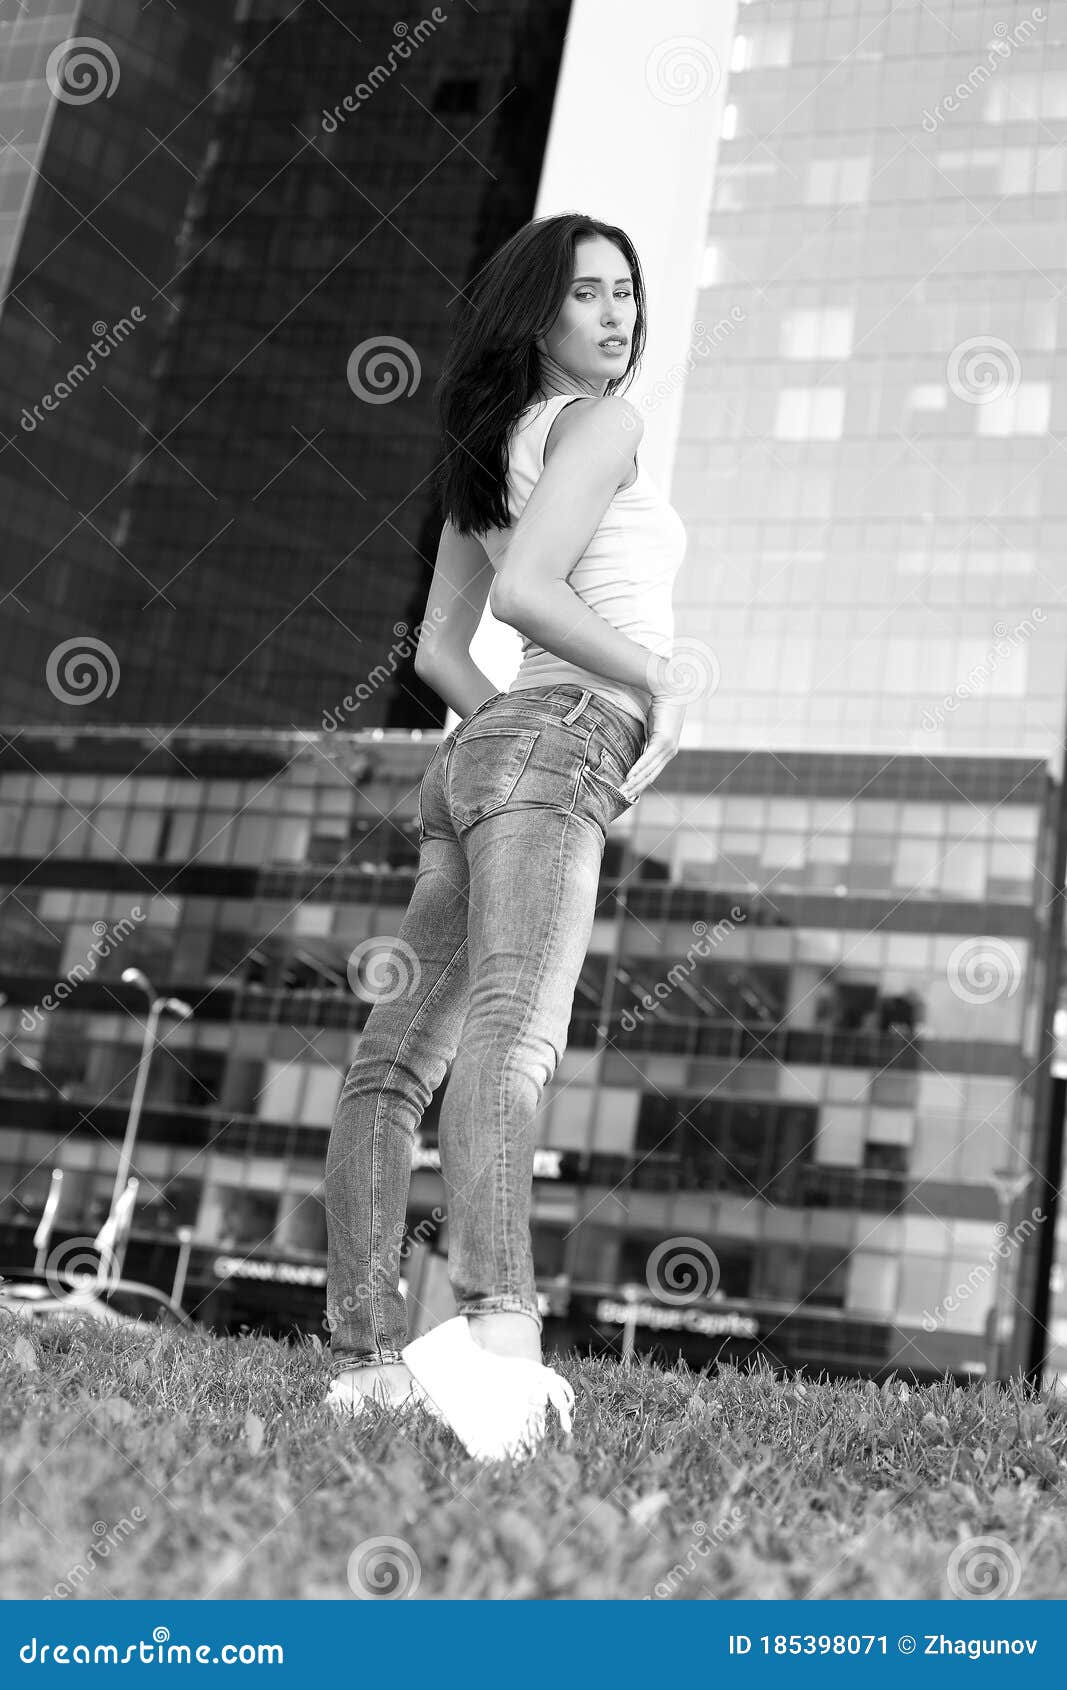 Young Girl In Jeans Posing Outdoors Stock Image - Image of fashion ...